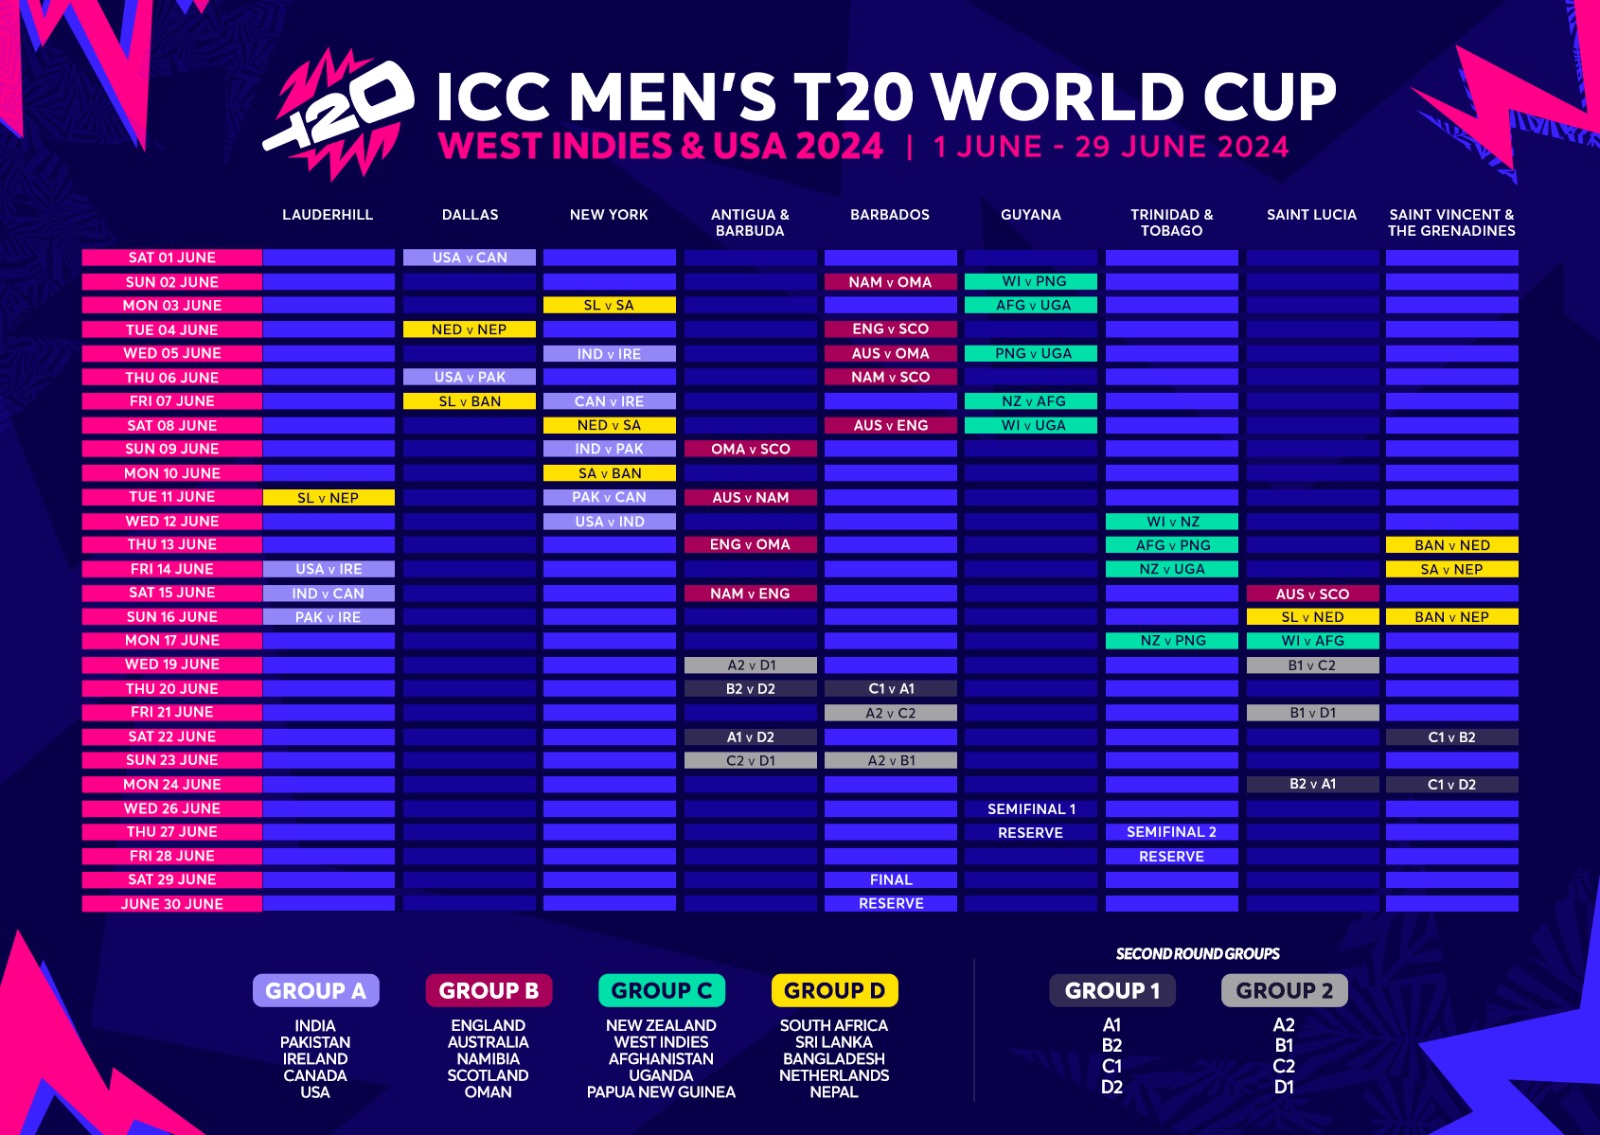 India T20 World Cup 2024 Group and Location wise Matches list, ICC Men's T20 World Cup 2024 Full schedule Group Wise